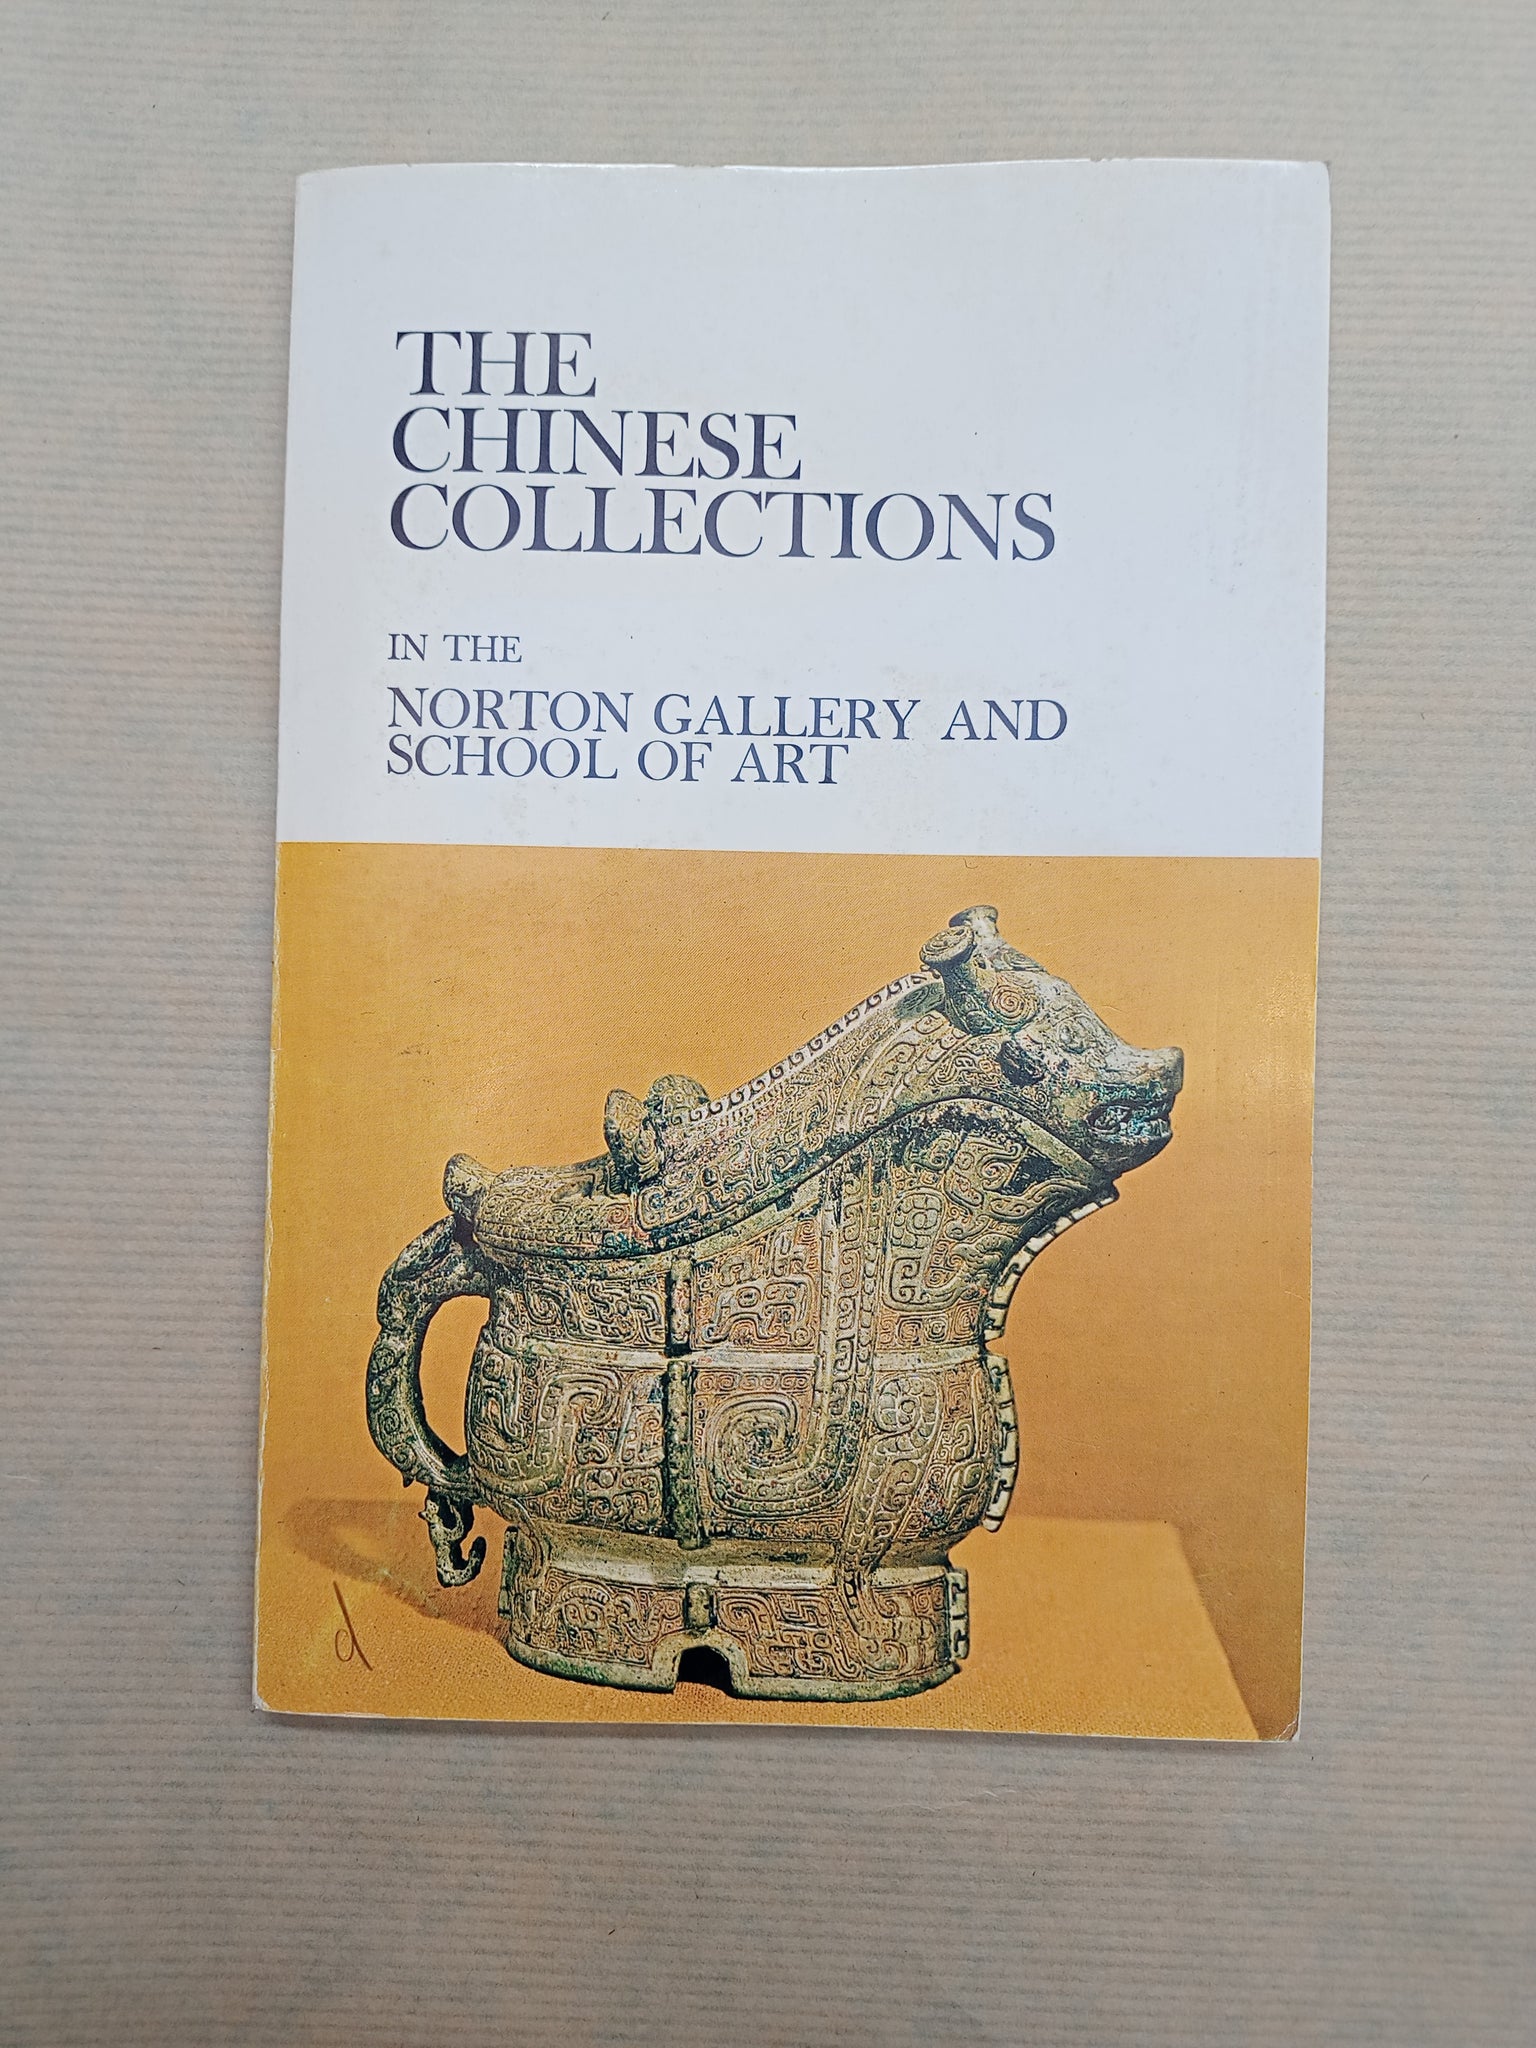 A handbook of the chinese collections in the Norton gallery and school of art.